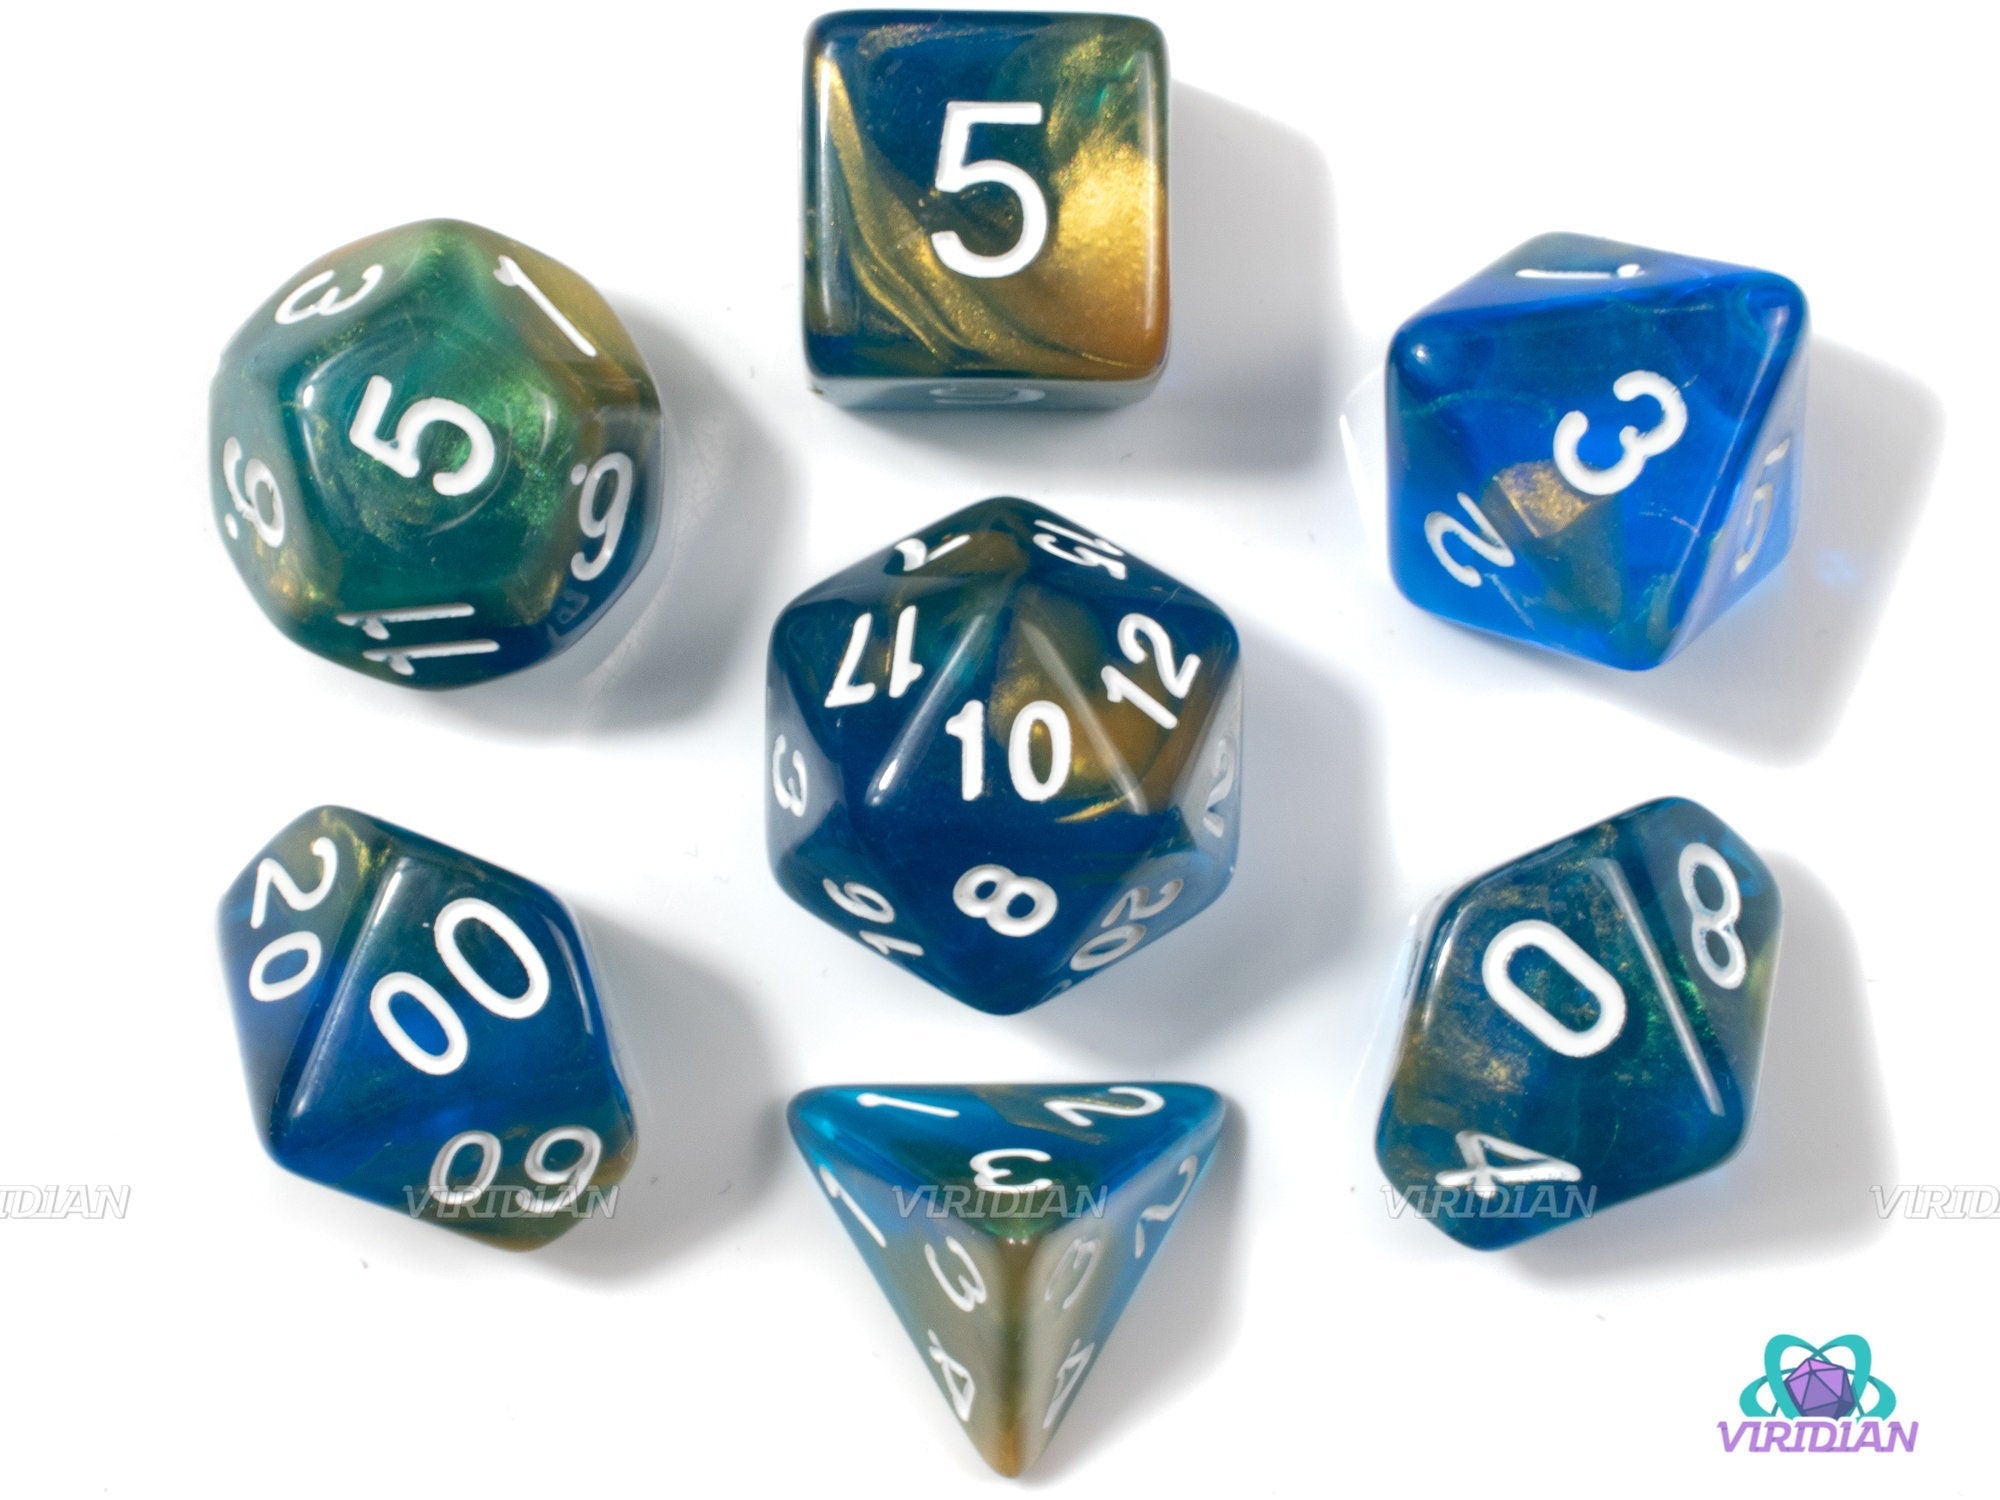 Riptide | Blue, Teal & Gold Translucent Acrylic Dice Set (7) | Dungeons and Dragons (DnD)